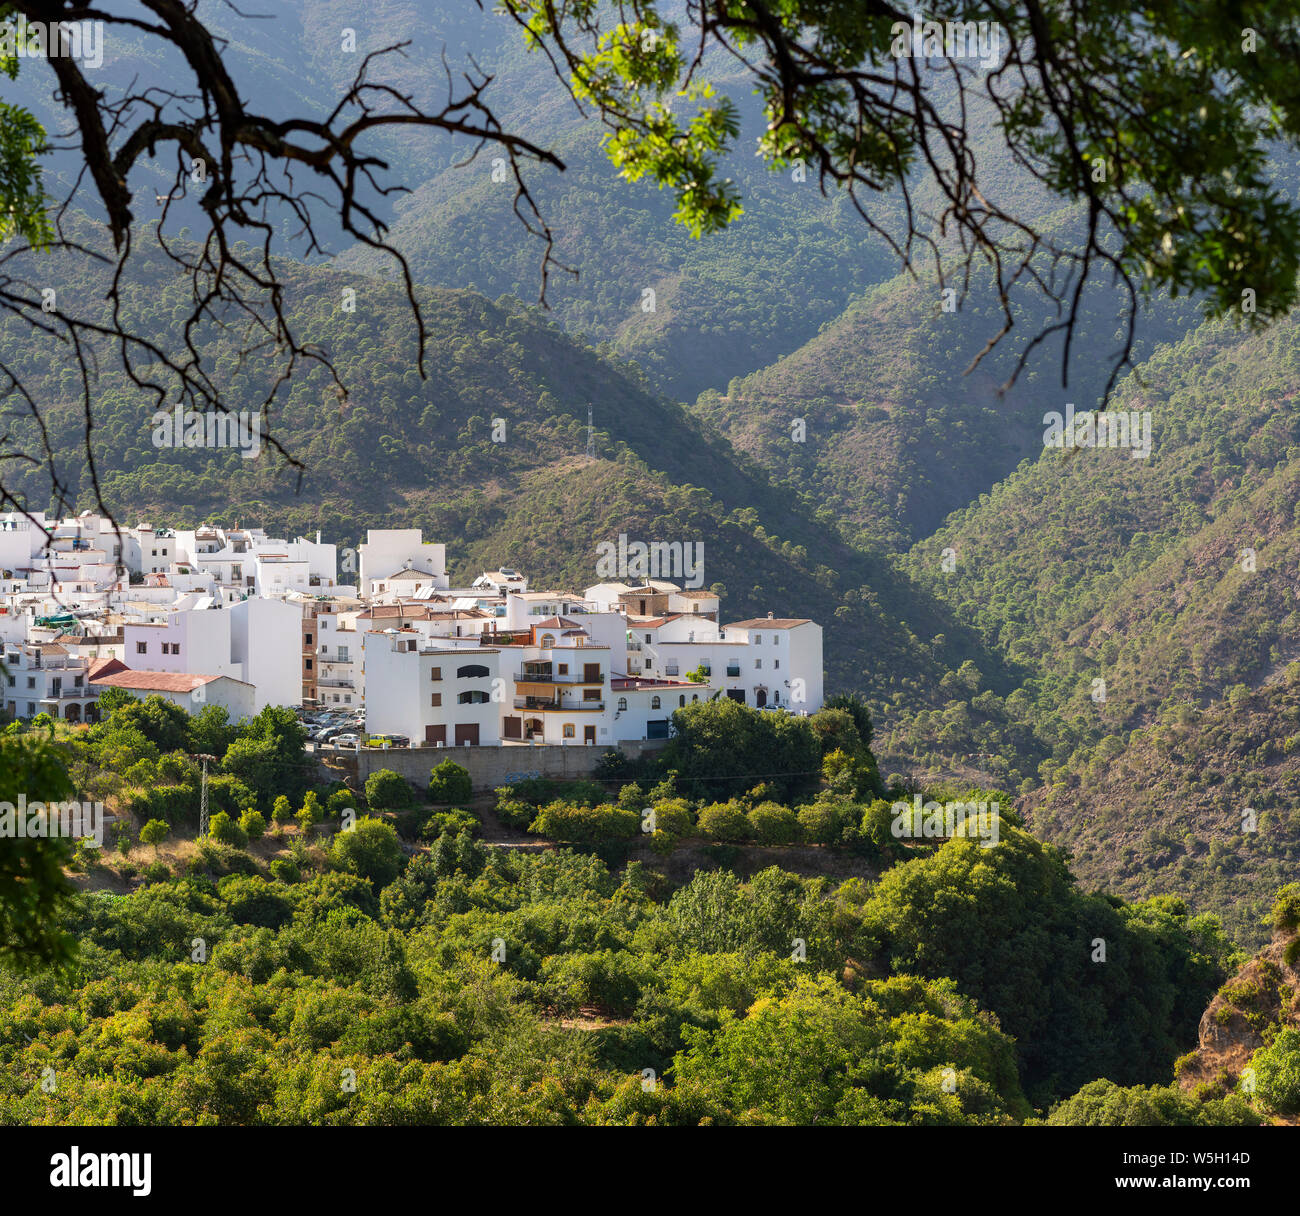 The white washed village of Istan, hidden in mountain range of Sierra de las Nieves, Andalusia, Spain Stock Photo